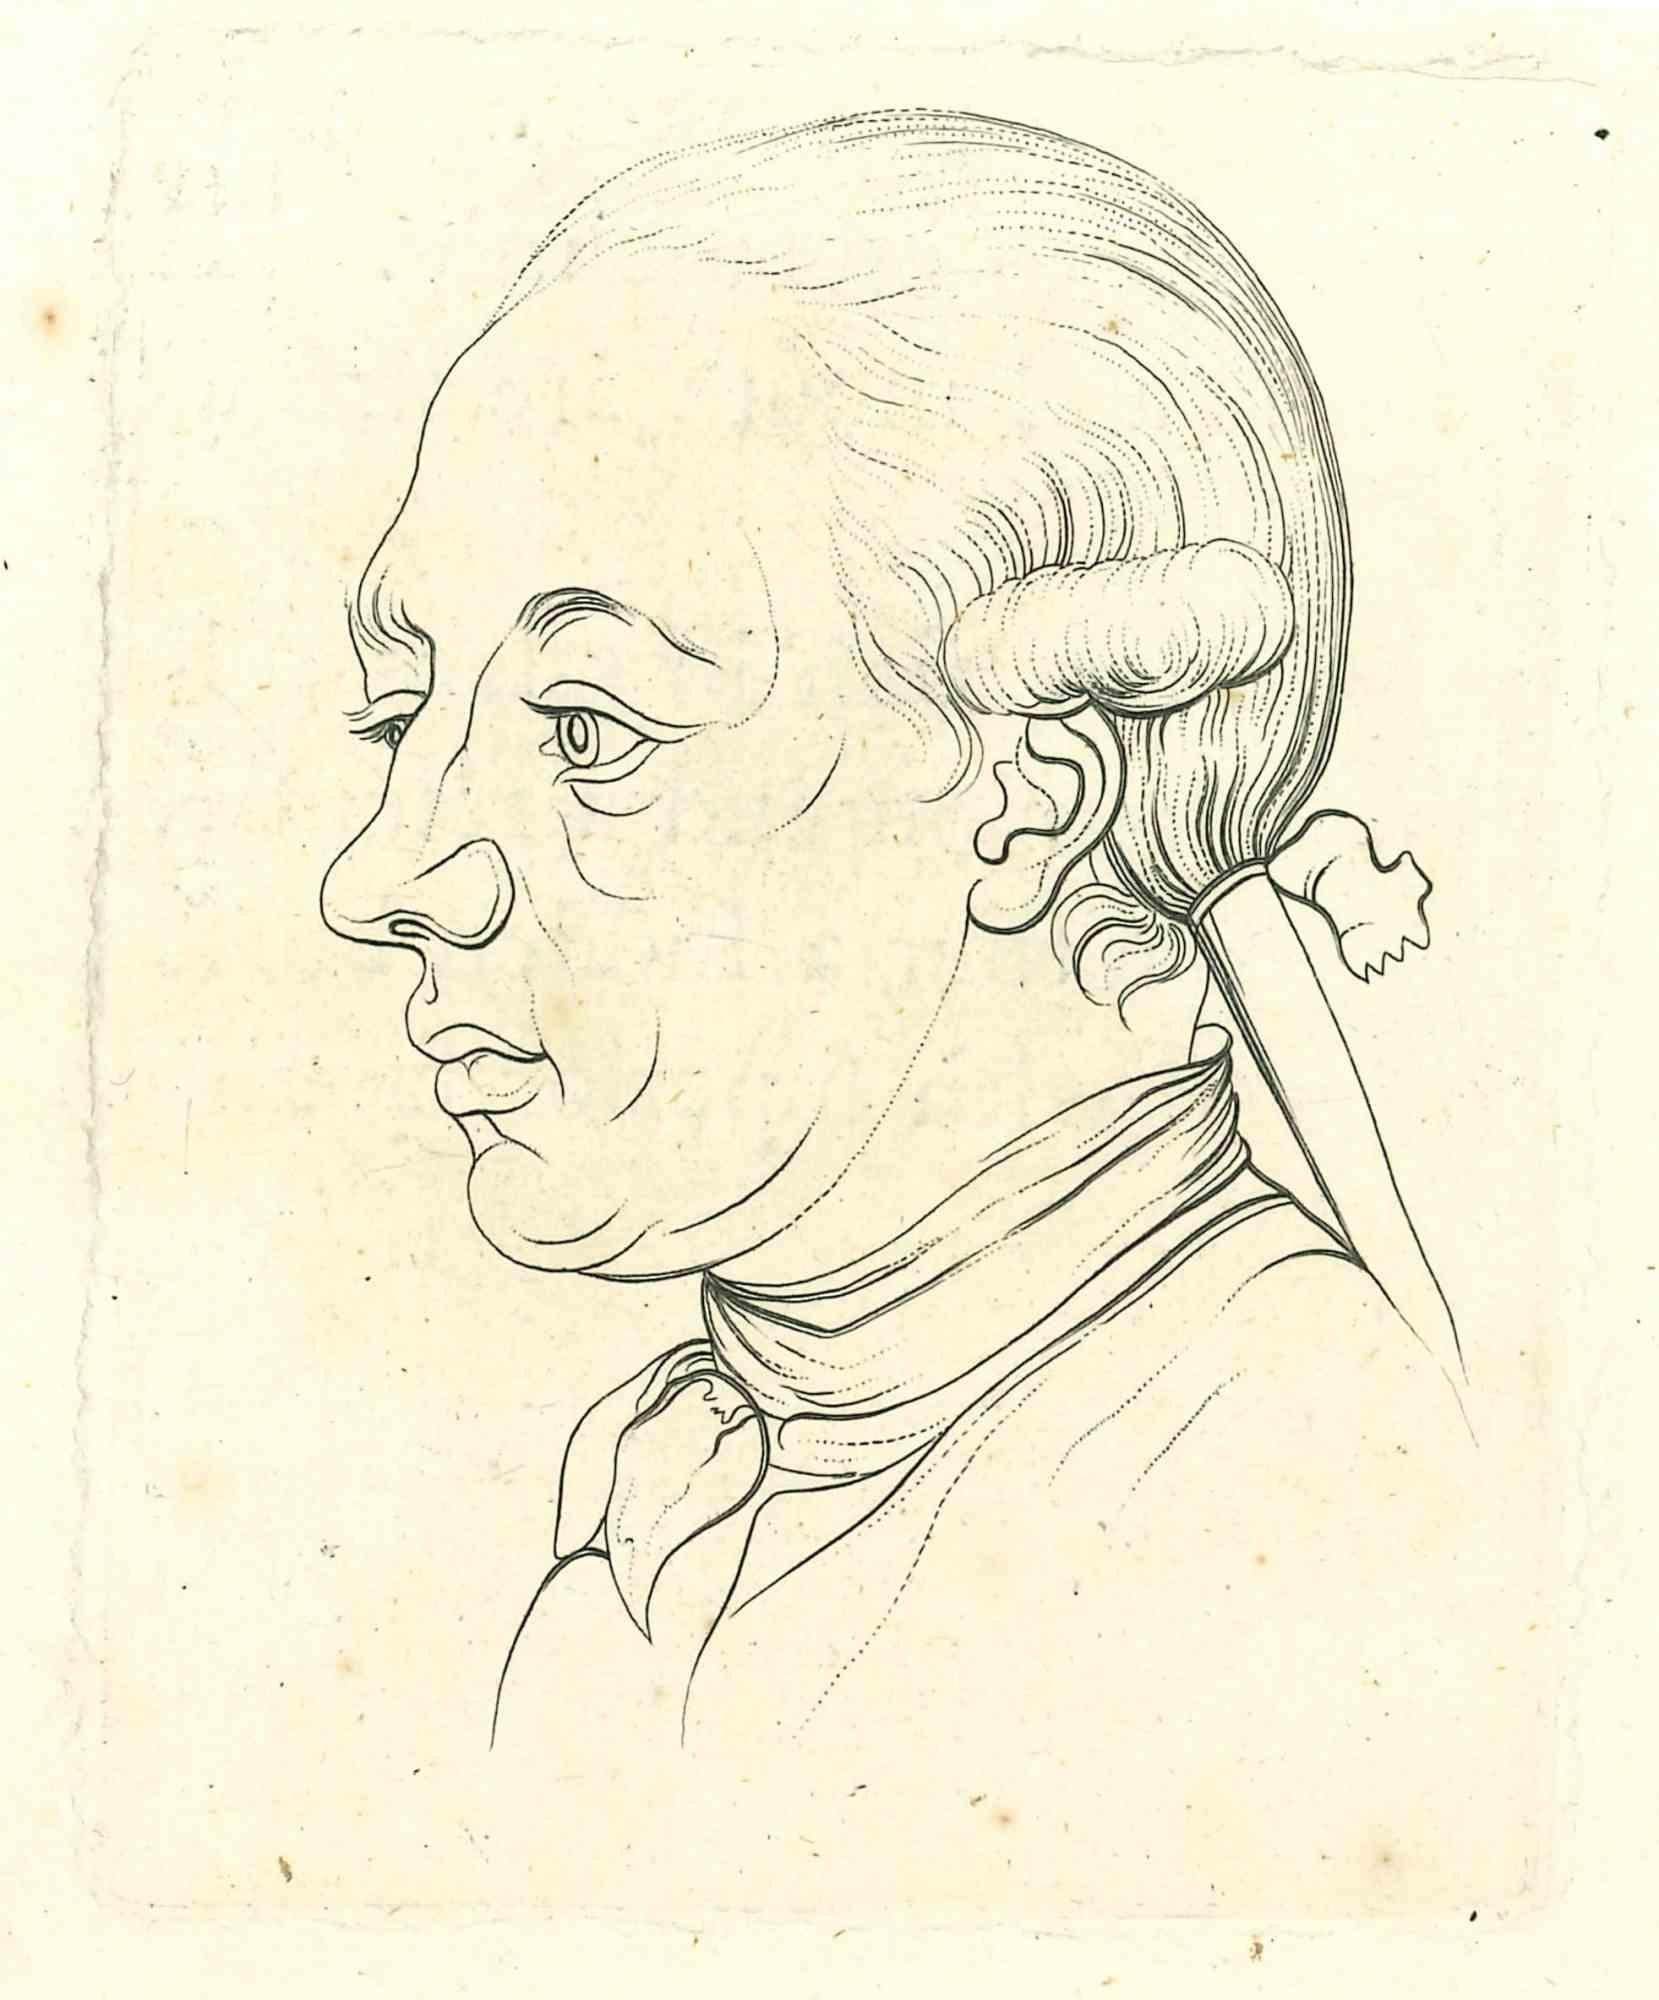 Portrait is an original artwork realized by Thomas Holloway (1748 - 1827).

Original Etching from J.C. Lavater's "Essays on Physiognomy, Designed to promote the Knowledge and the Love of Mankind", London, Bensley, 1810. 

This artwork portrays a